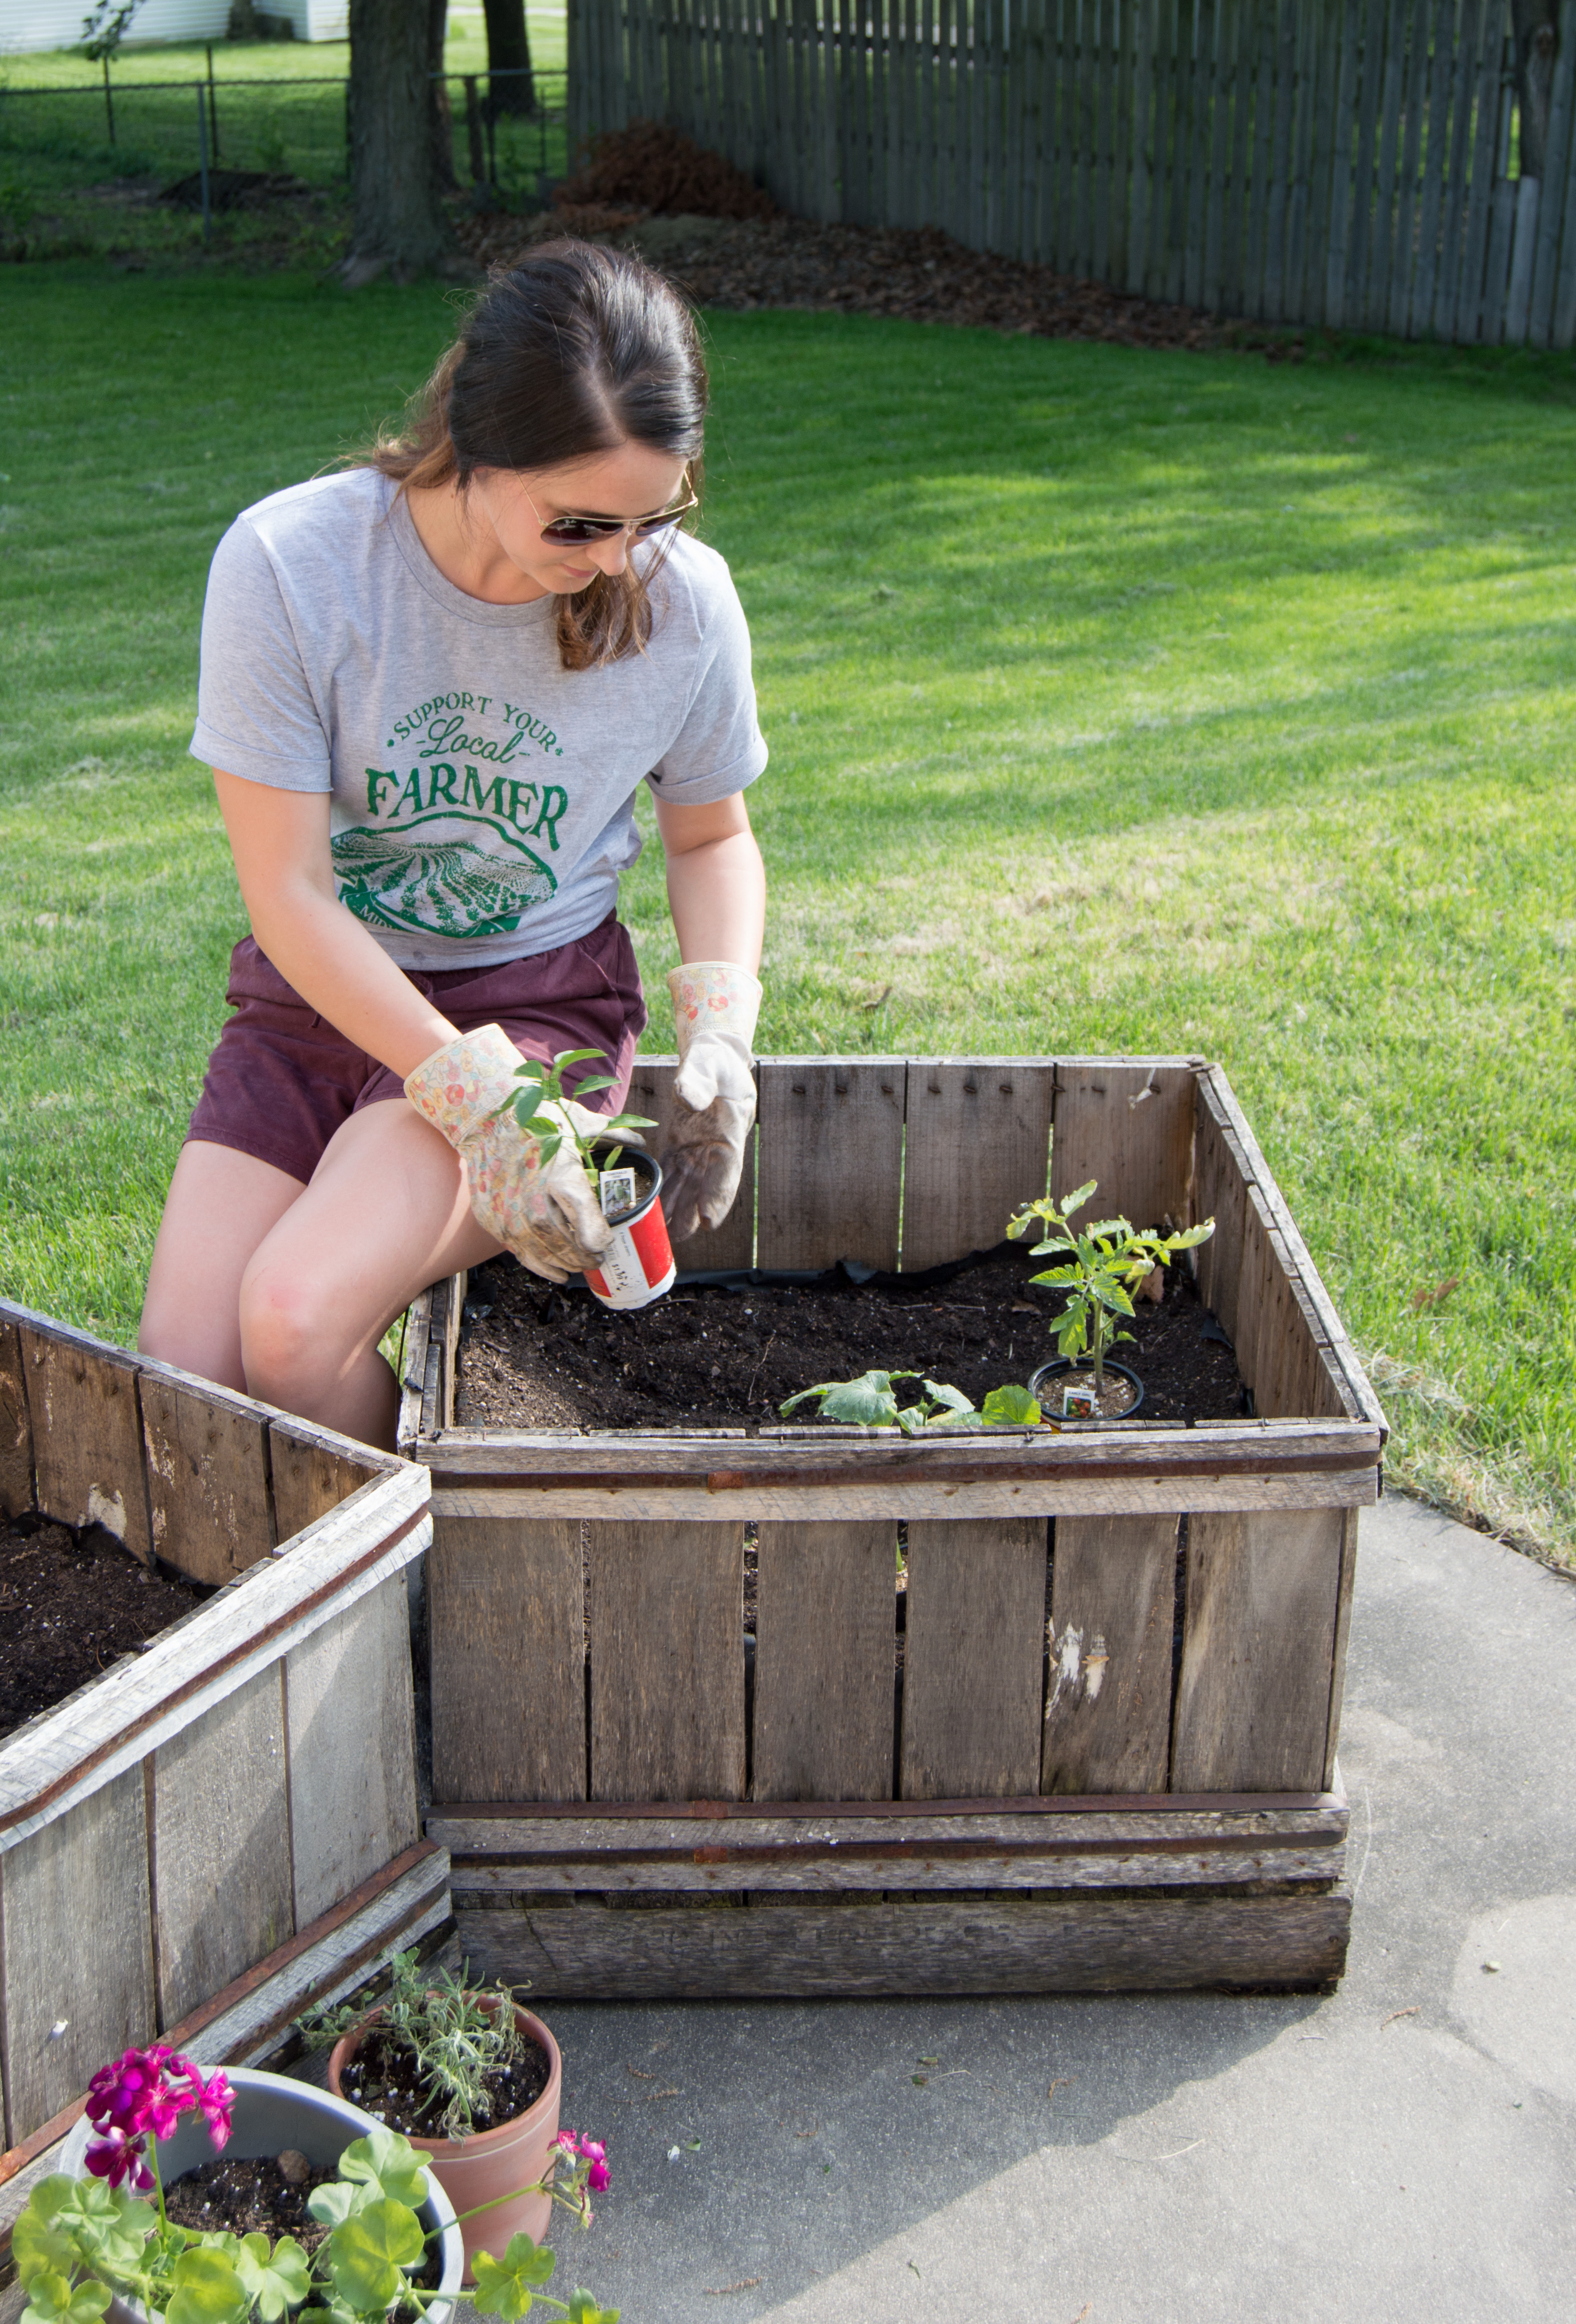 spring planting - Happy Camper Clothing Co. - Support Your Local Farmer's Tee